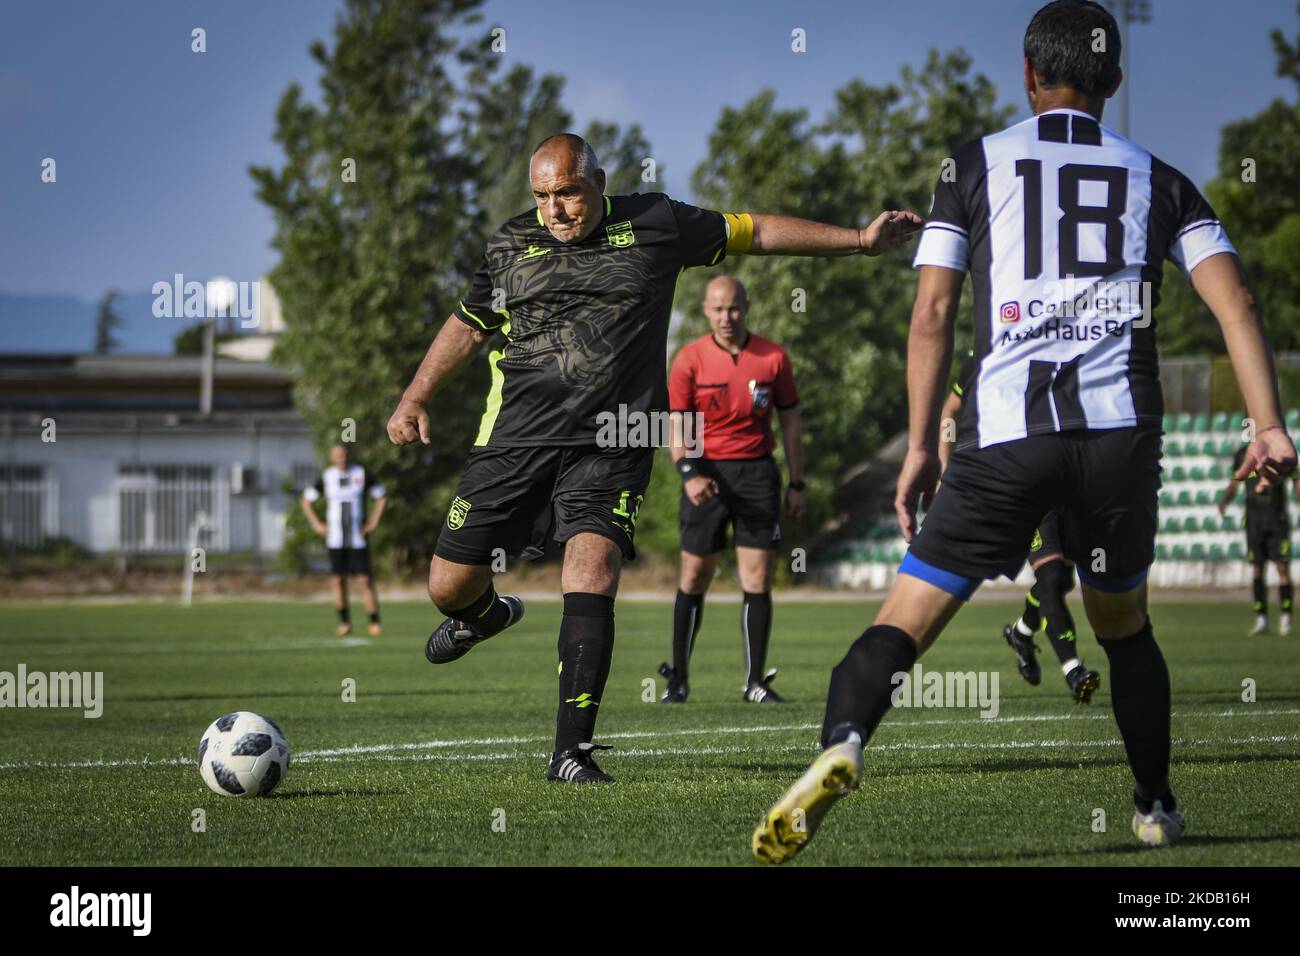 Former Bulgarian Prime Minister Boyko Borisov won Bulgarian football cup for veterans for sixth time. Boyko Borisov scored forth goal for the win with 4:2 against Lokomotiv Plovdiv. Borisov on 26 May, 2022 in Sofia, Bulgaria. Borisov plays with number 13 as a striker for amateur team of Vitosha Bistritsa and In 2013 became the oldest footballer to appear for a Bulgarian professional club when, aged 54. (Photo by Georgi Paleykov/NurPhoto) Stock Photo